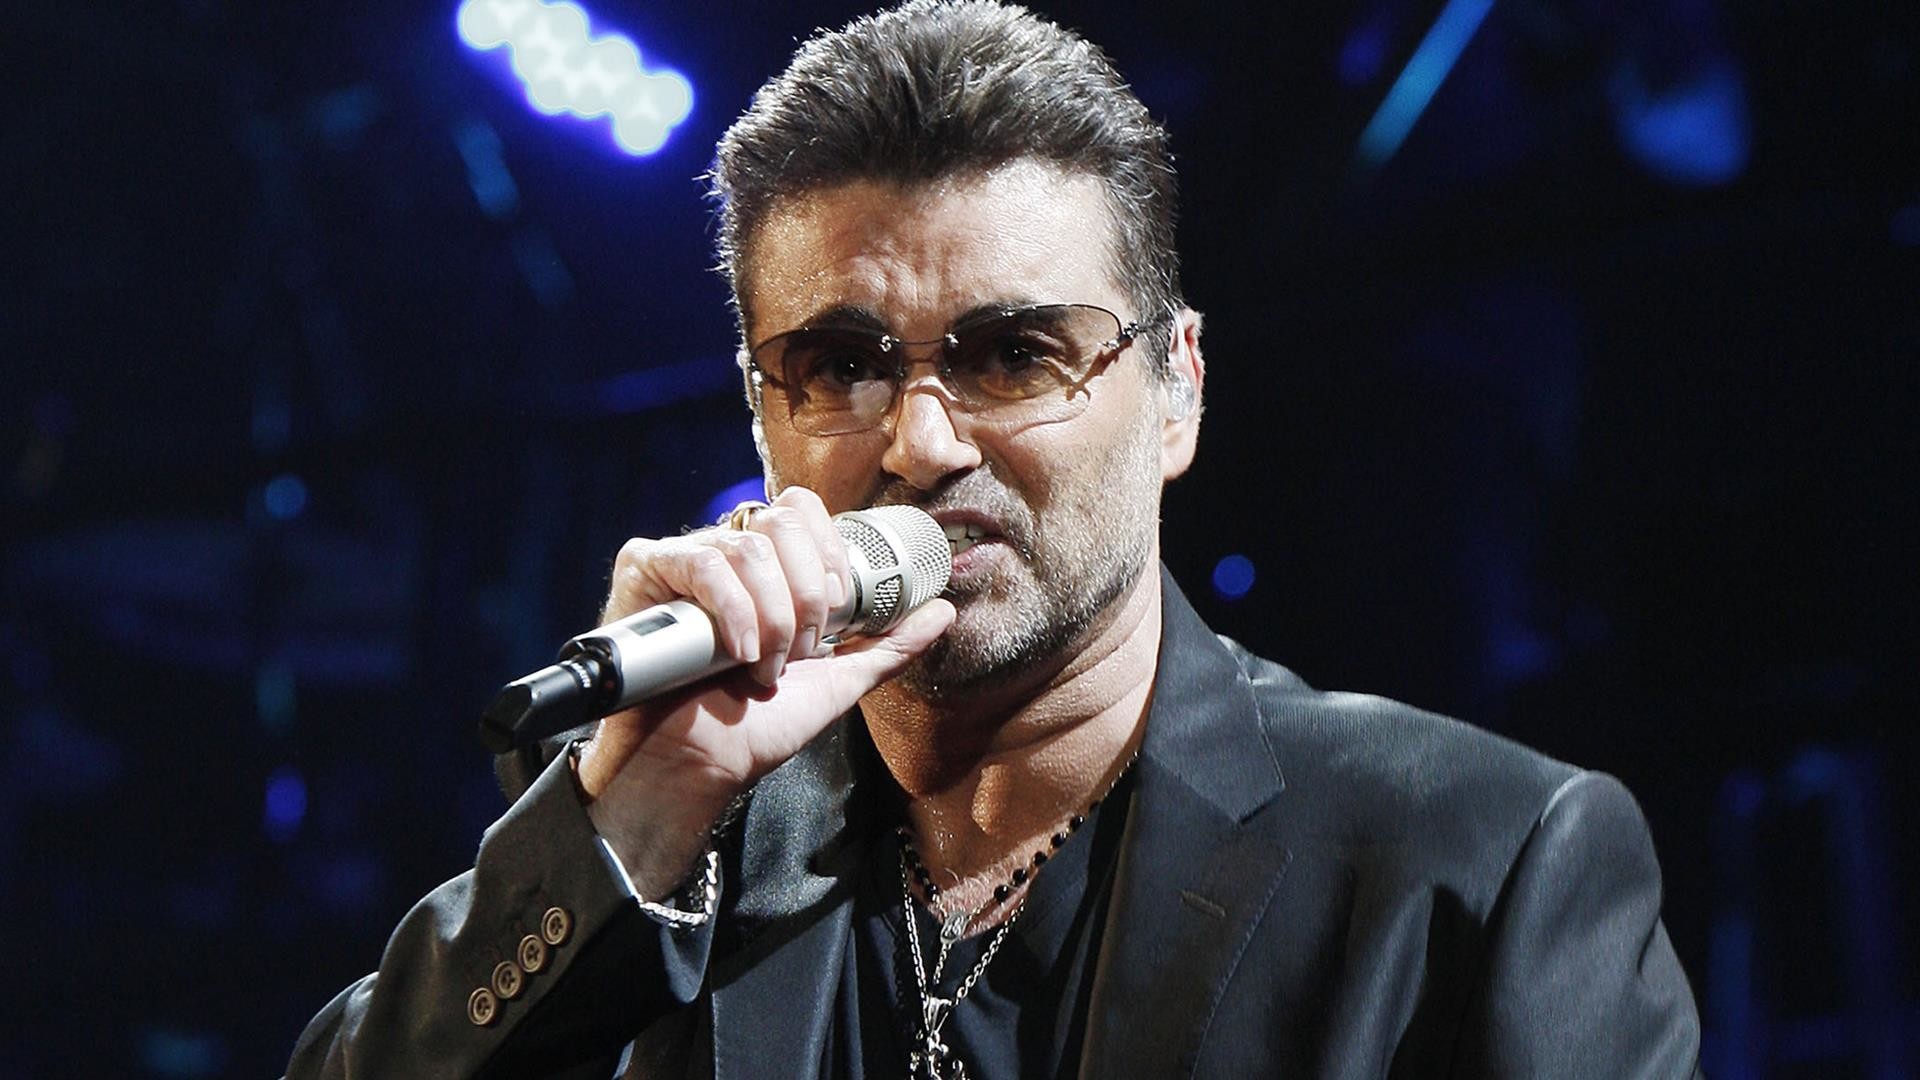 1920x1080 Madonna, Paul McCartney and other celebs remember George Michael - TODAY.com